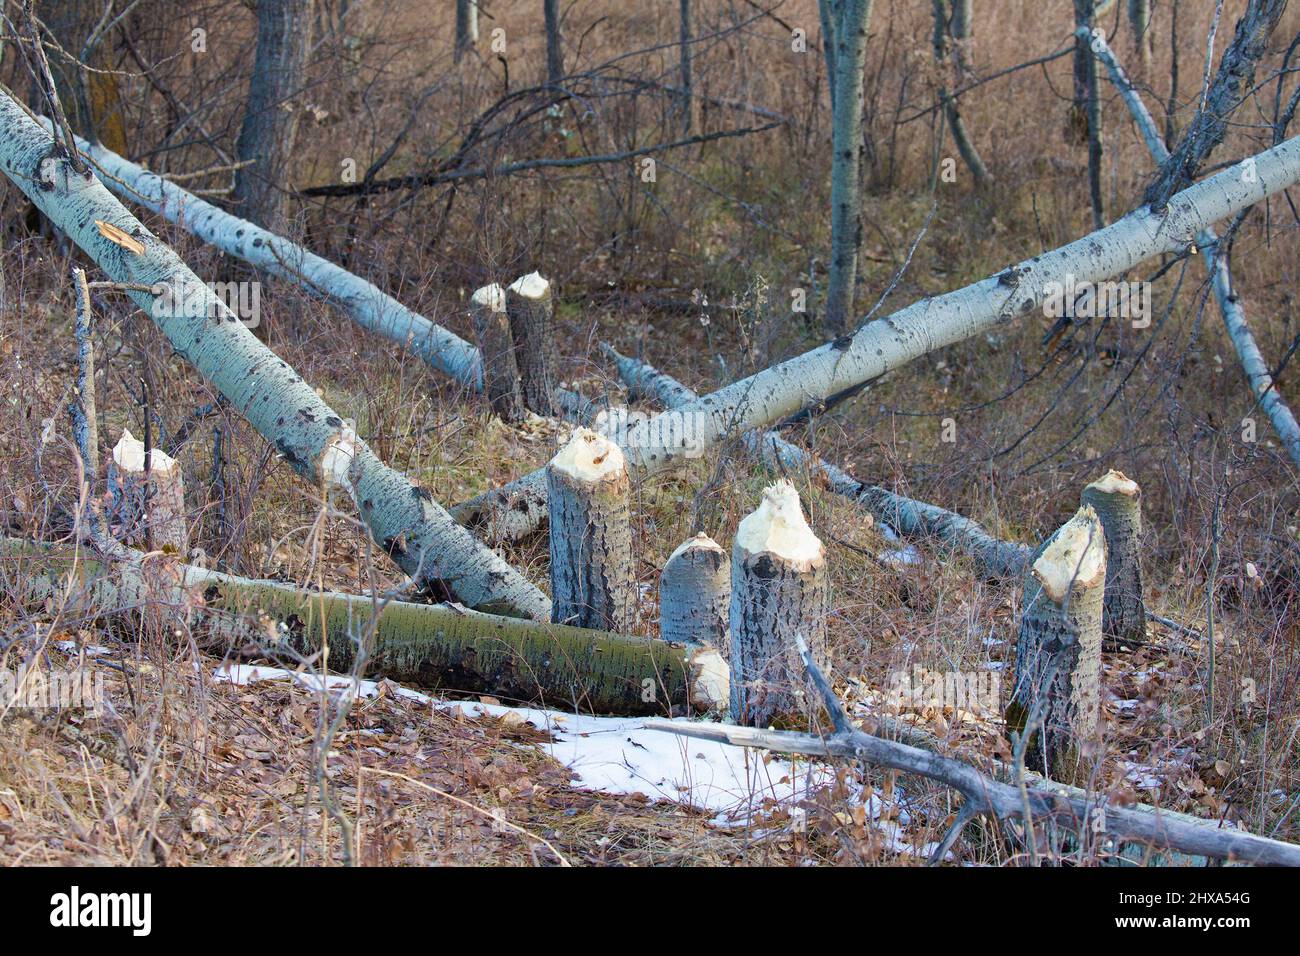 Beaver chewed Aspen trees in forest. The tree trunks were felled by the animals in autumn for a winter food supply. Populus tremuloides Stock Photo